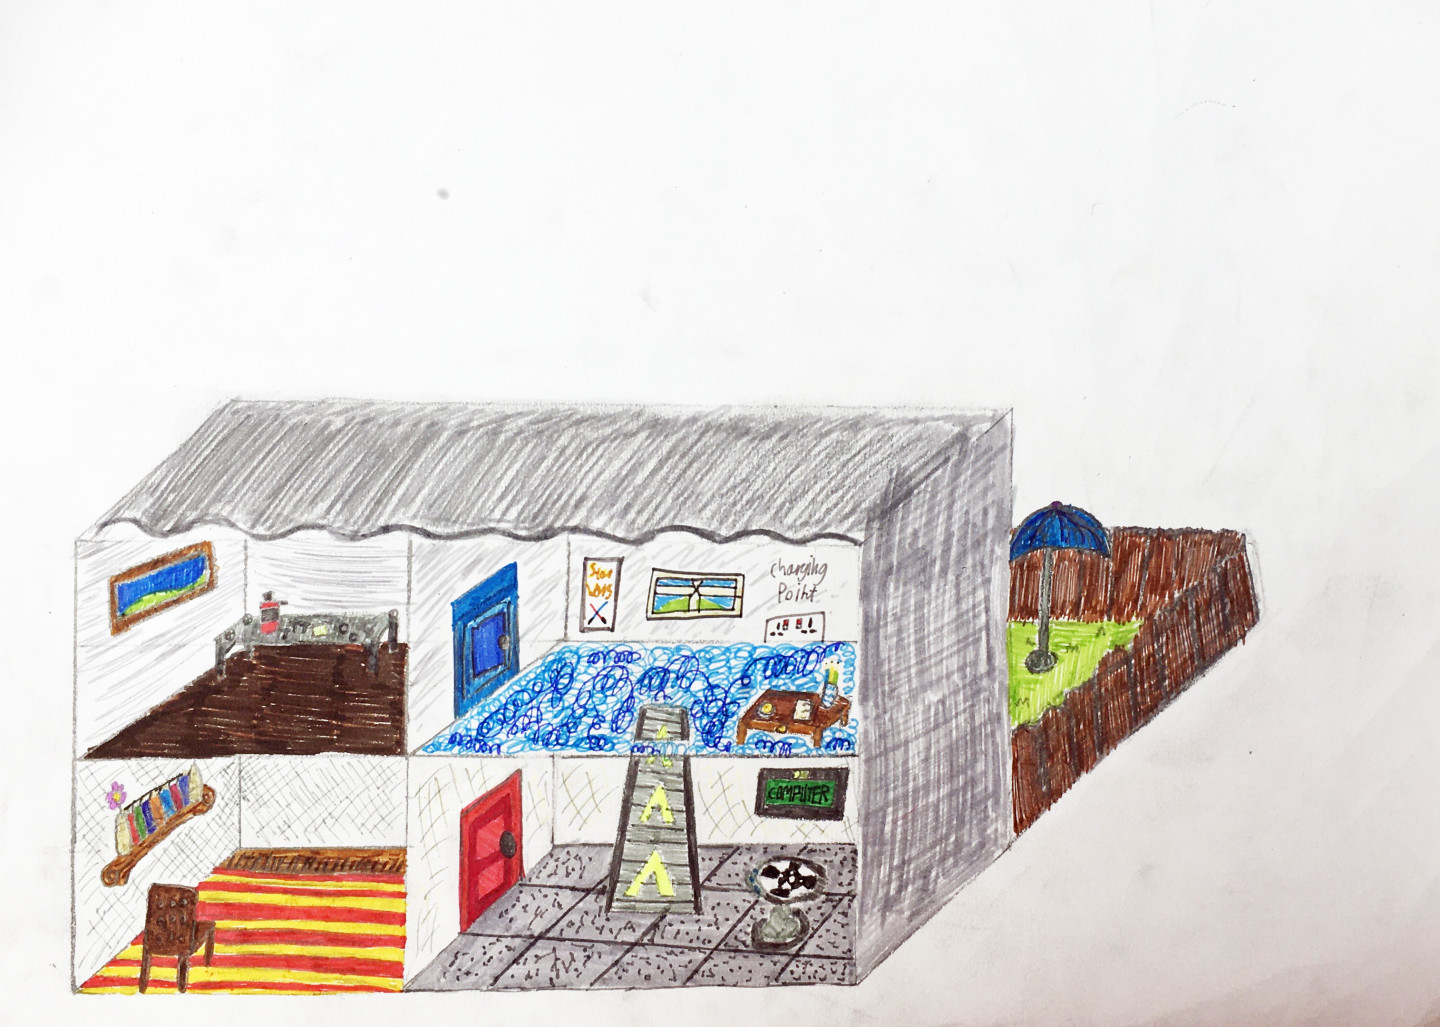 RUNNER UP - SETH, AGE 12. 
A home for R2-D2. My design contains 4 rooms and a garden. The first room is a living room with a blank wall. This is more useful than a TV to R2-D2 because he can project any film or TV show he wants to watch out of his built-in projector. Due to his shape and stature he doesn’t need to sit down. However, there is a chair in the living room in case his best friend C3PO visits. The next room along contains a hollochess board as seen in the Star Wars movies. There is also a touchscreen computer in the wall. In the middle of the room there is a conveyor belt which leads upto R2-D2 ‘s bedroom on the second floor. Even though it’s a bedroom there is no bed in the room because R2-D2 can sleep standing up. The next room along is a workshop. It is frequently mentioned in the movies that R2-D2 is an avid mechanic and engineer so this gives him a chance to enjoy his hobby. His garden has a large umbrella so he doesn’t overheat when it’s hot.Instead of making the house out of bricks I chose steel which is environmentally friendly, but suits R2-D2 better as he is made entirely of metal himself. Because R2-D2 does not need to eat or drink there is no requirement for disposable plastic food packaging in his house.